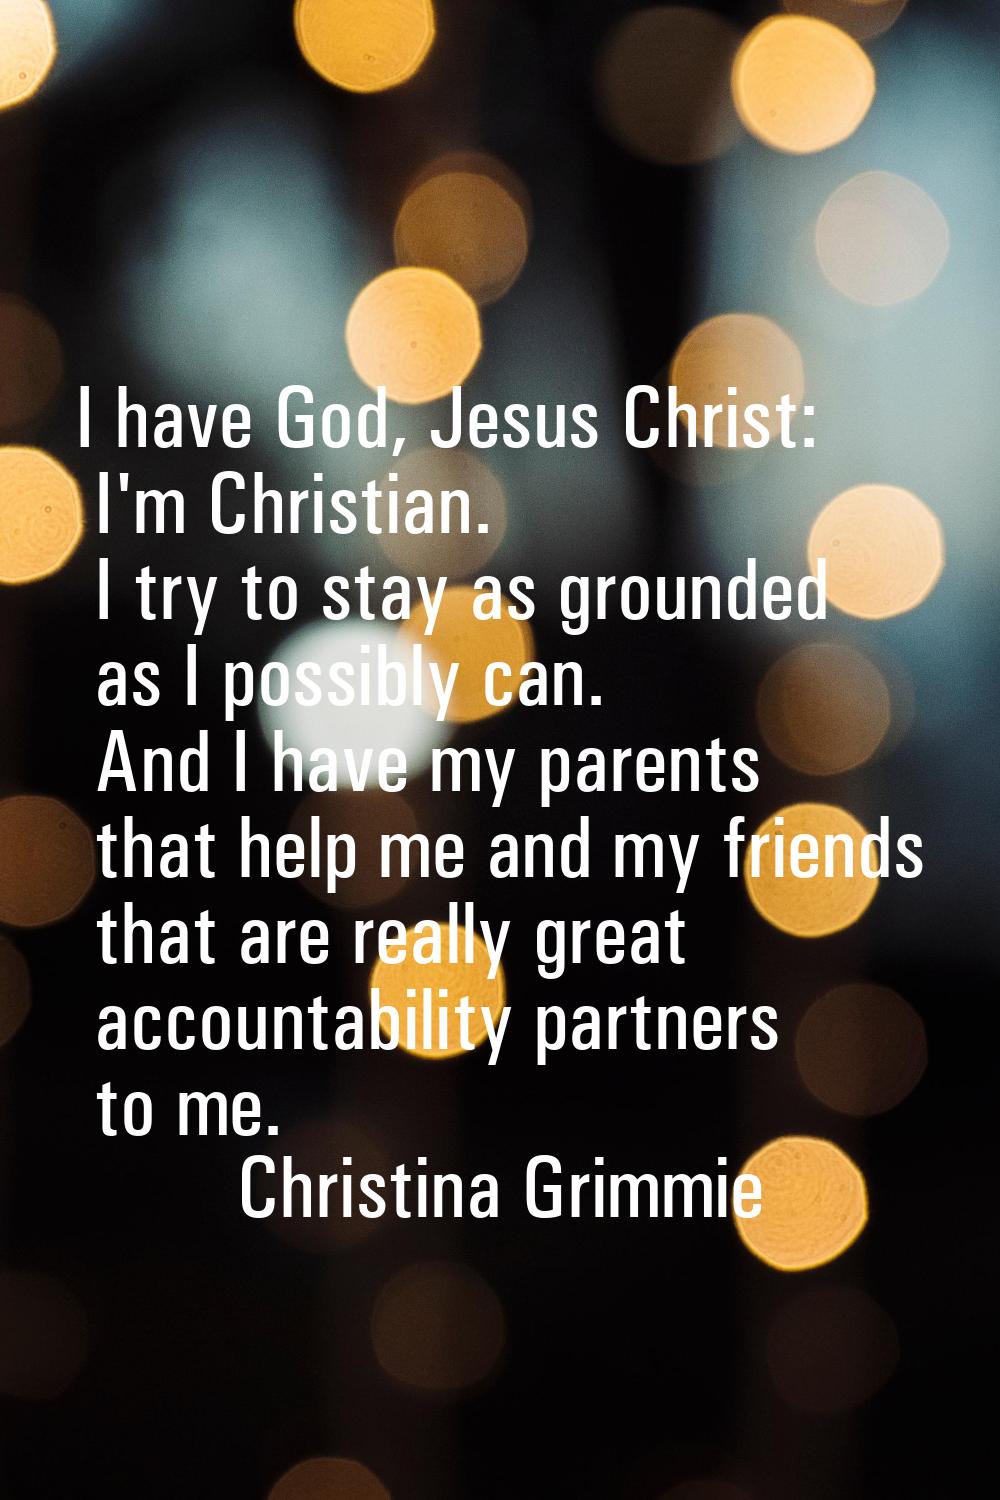 I have God, Jesus Christ: I'm Christian. I try to stay as grounded as I possibly can. And I have my